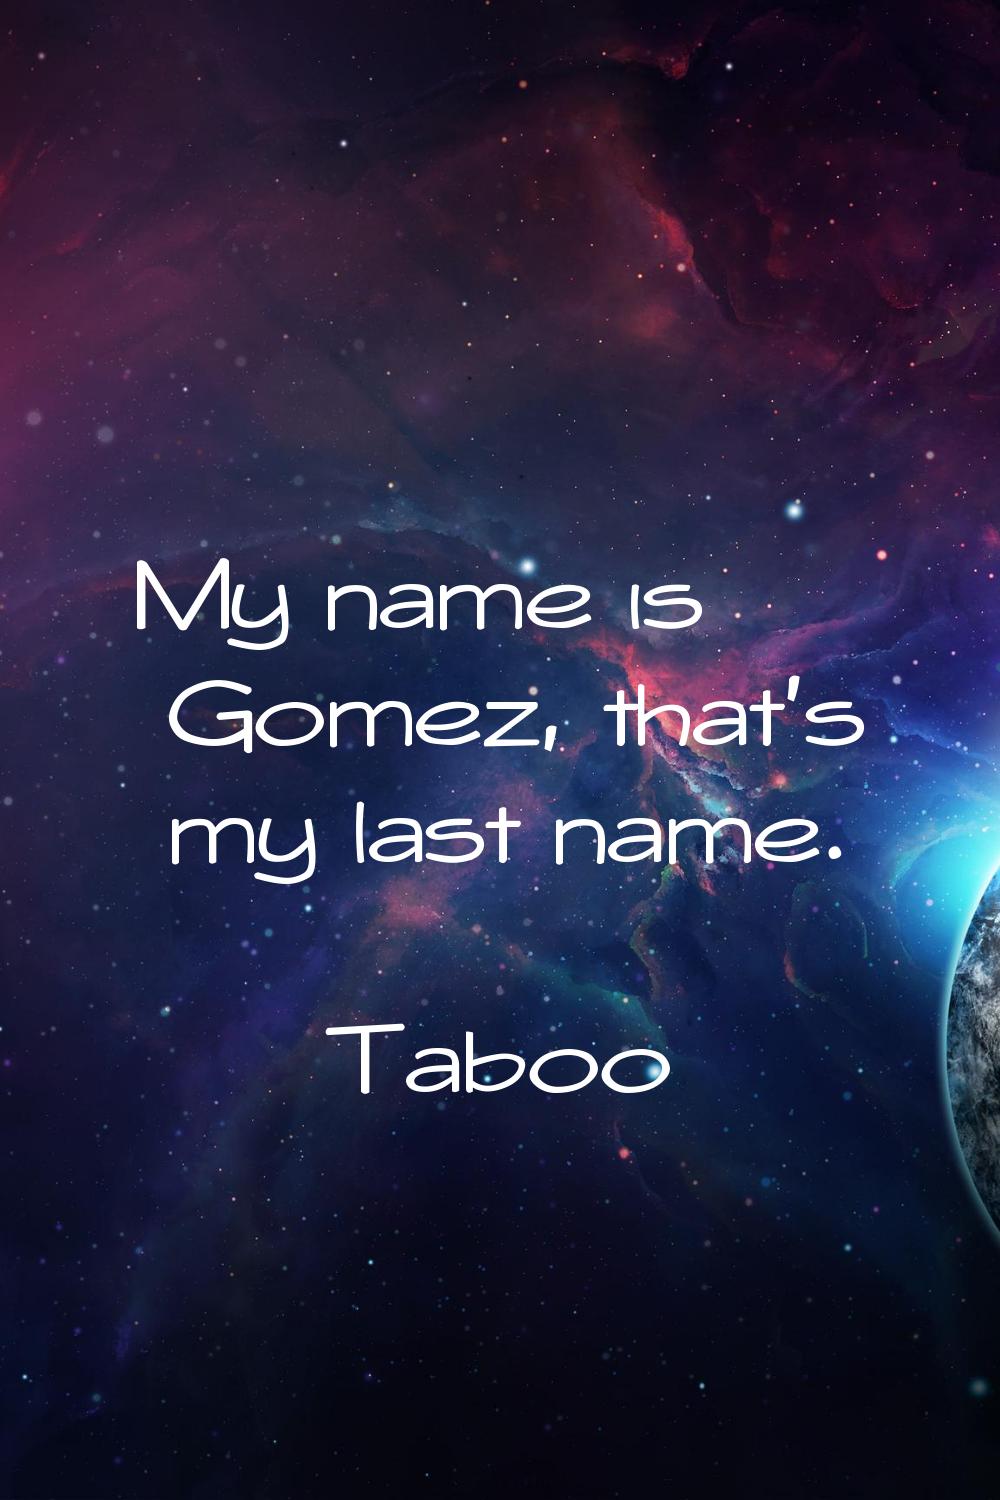 My name is Gomez, that's my last name.